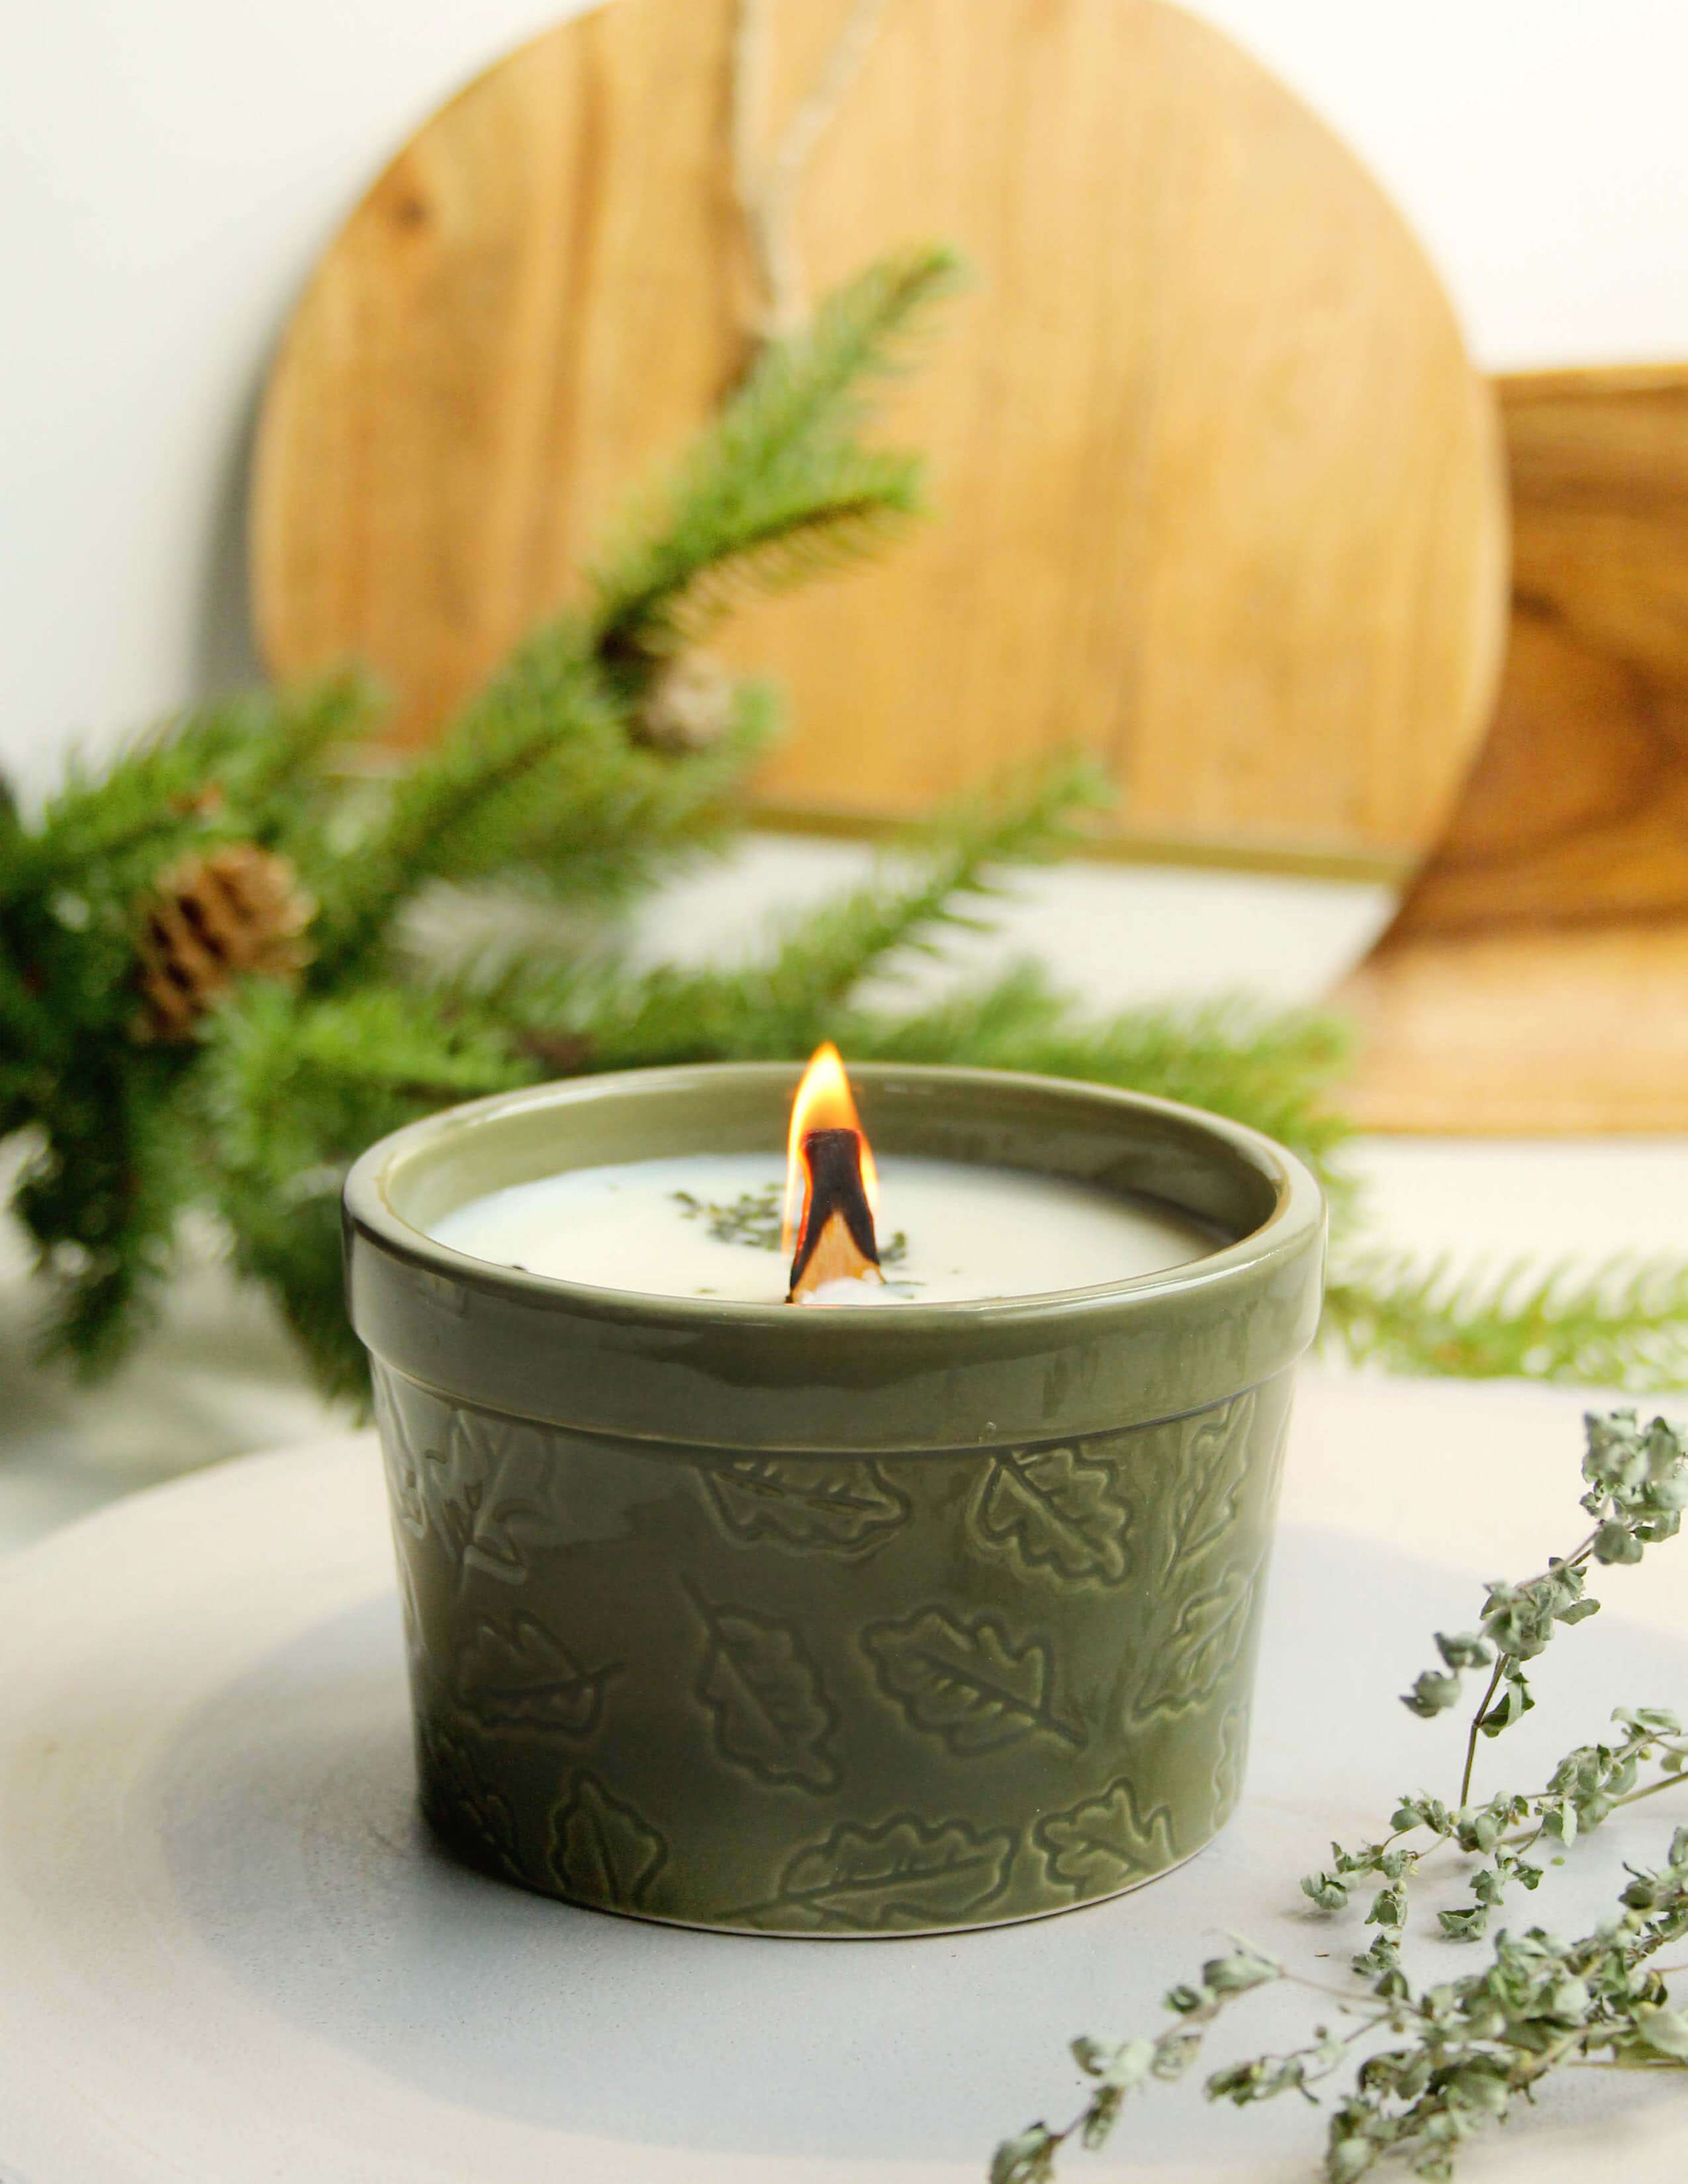 Blue Spruce Candles by Kristy Doubet Haare